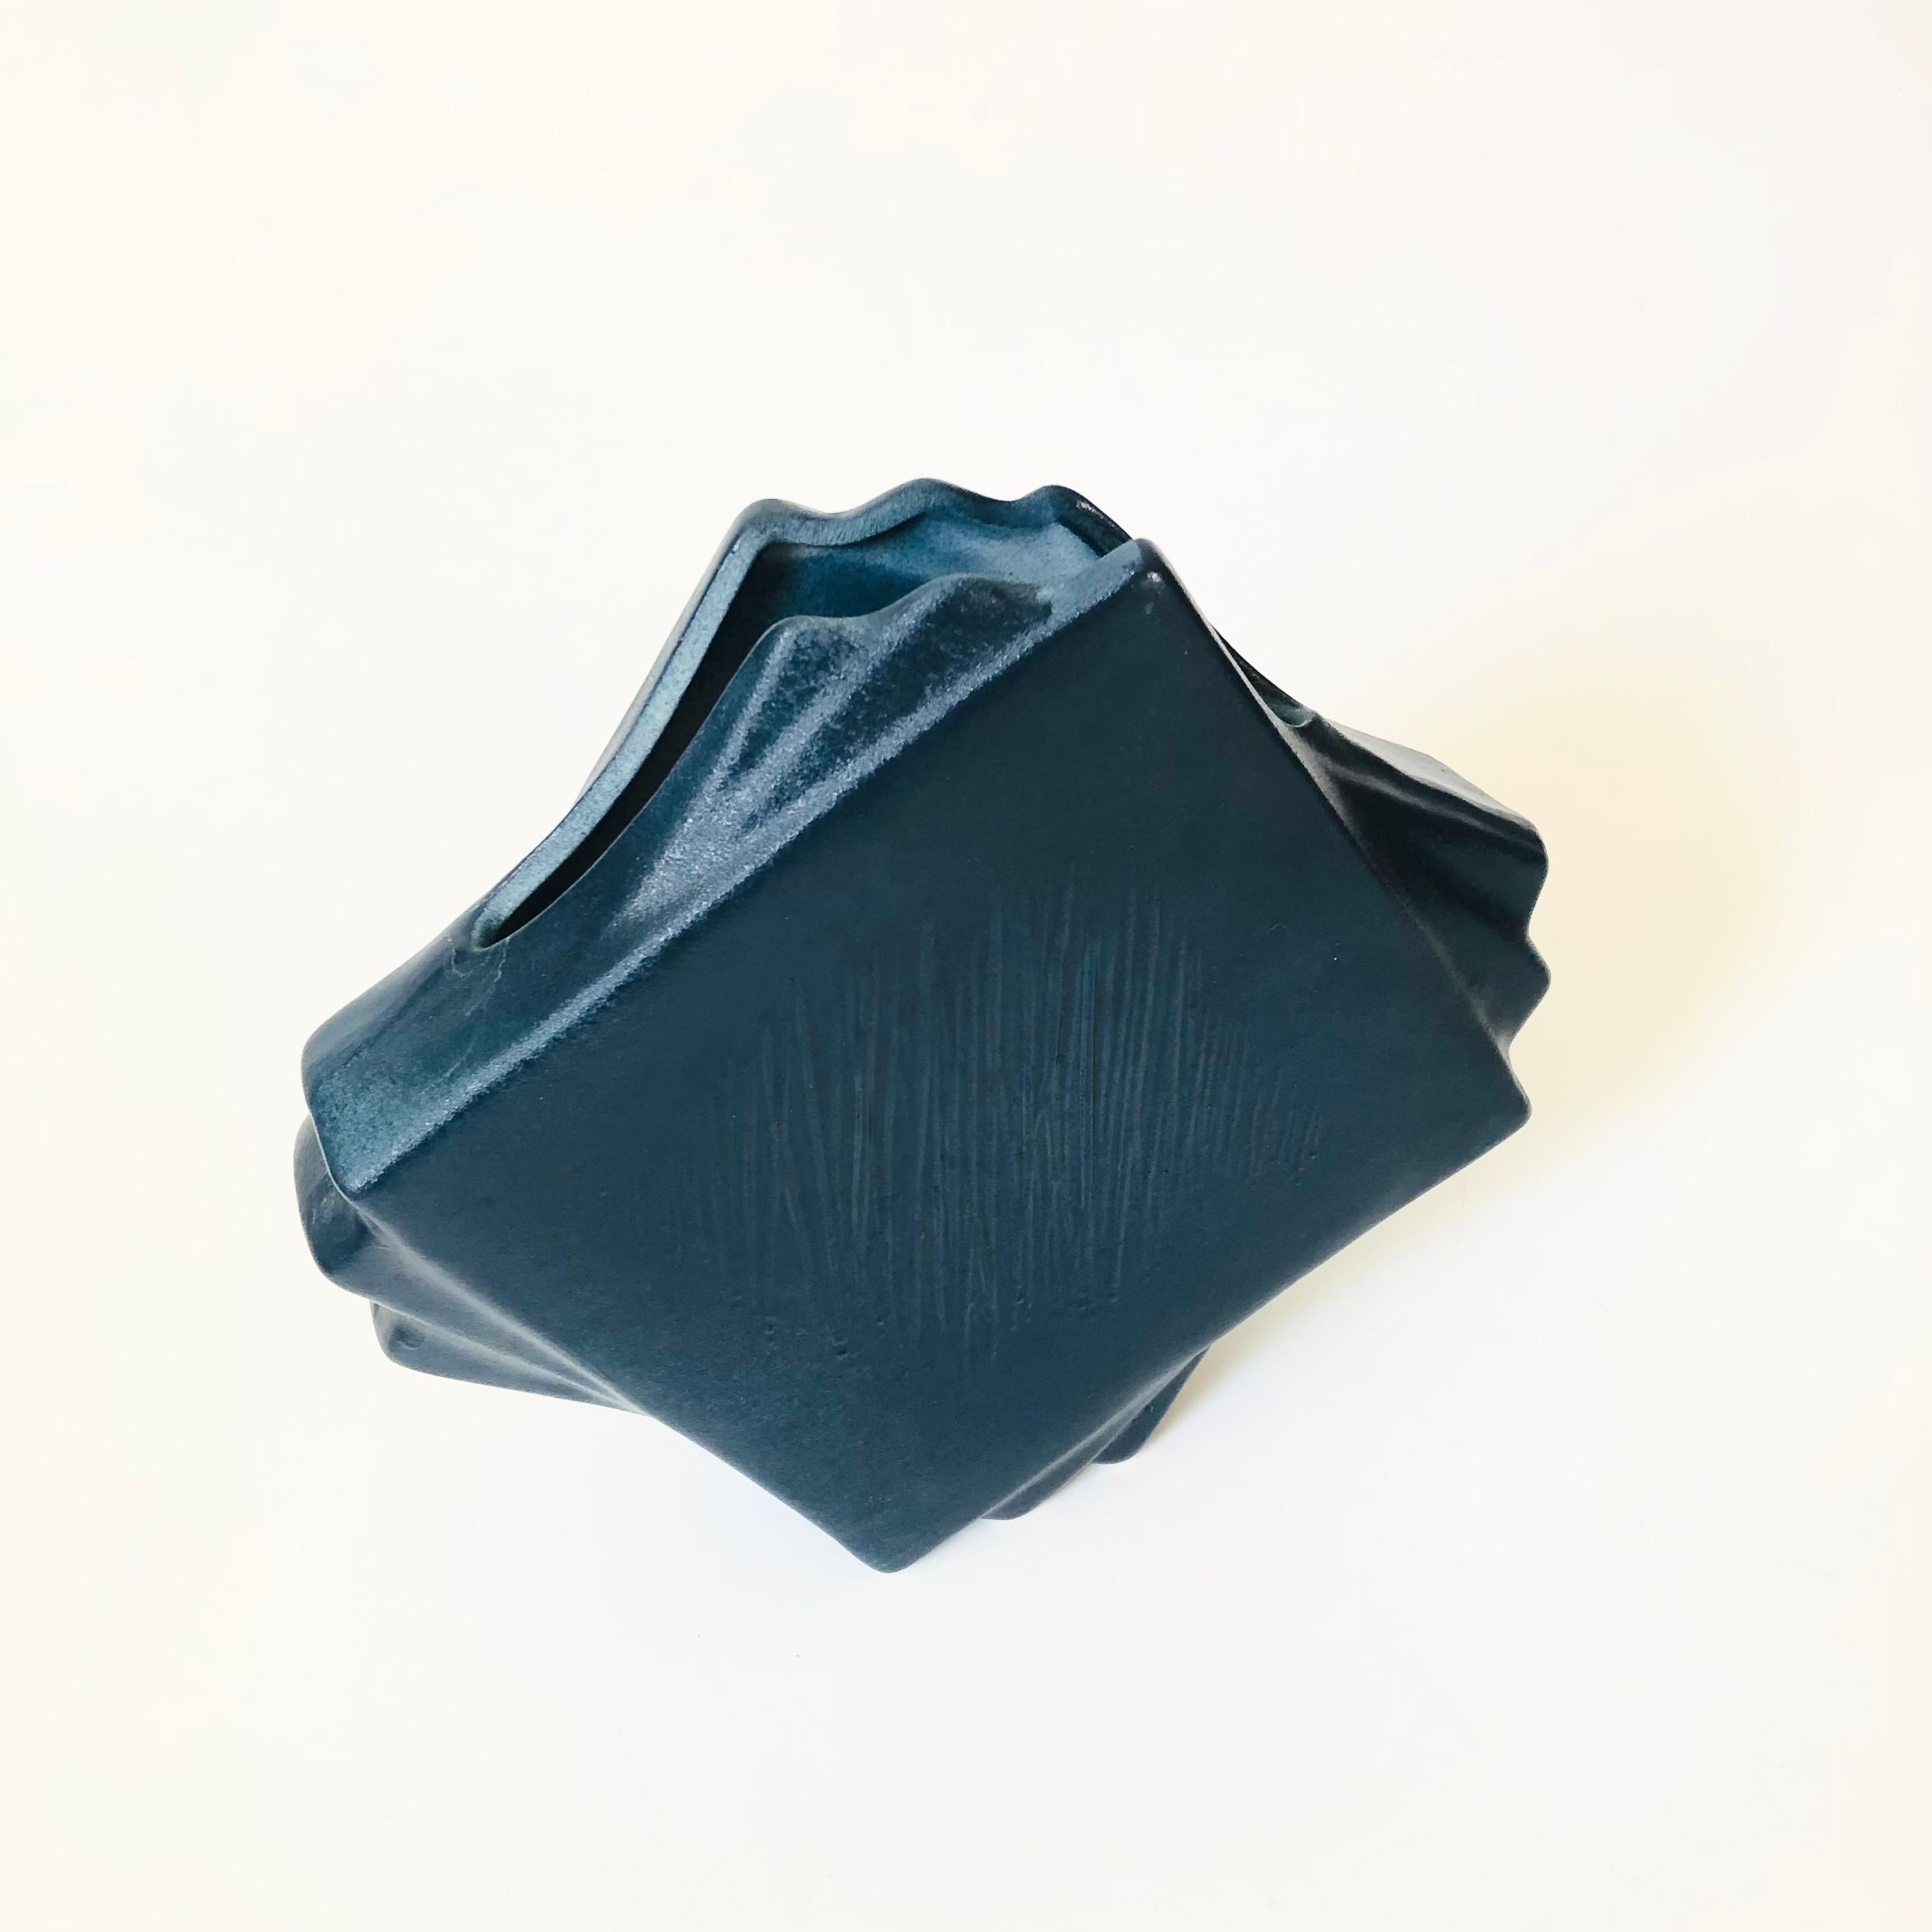 A vintage ceramic vase, made in Japan by Toyo. Great postmodern design resembling overlapping squares. Textured design on one side. Finished in a dark blue glaze.

